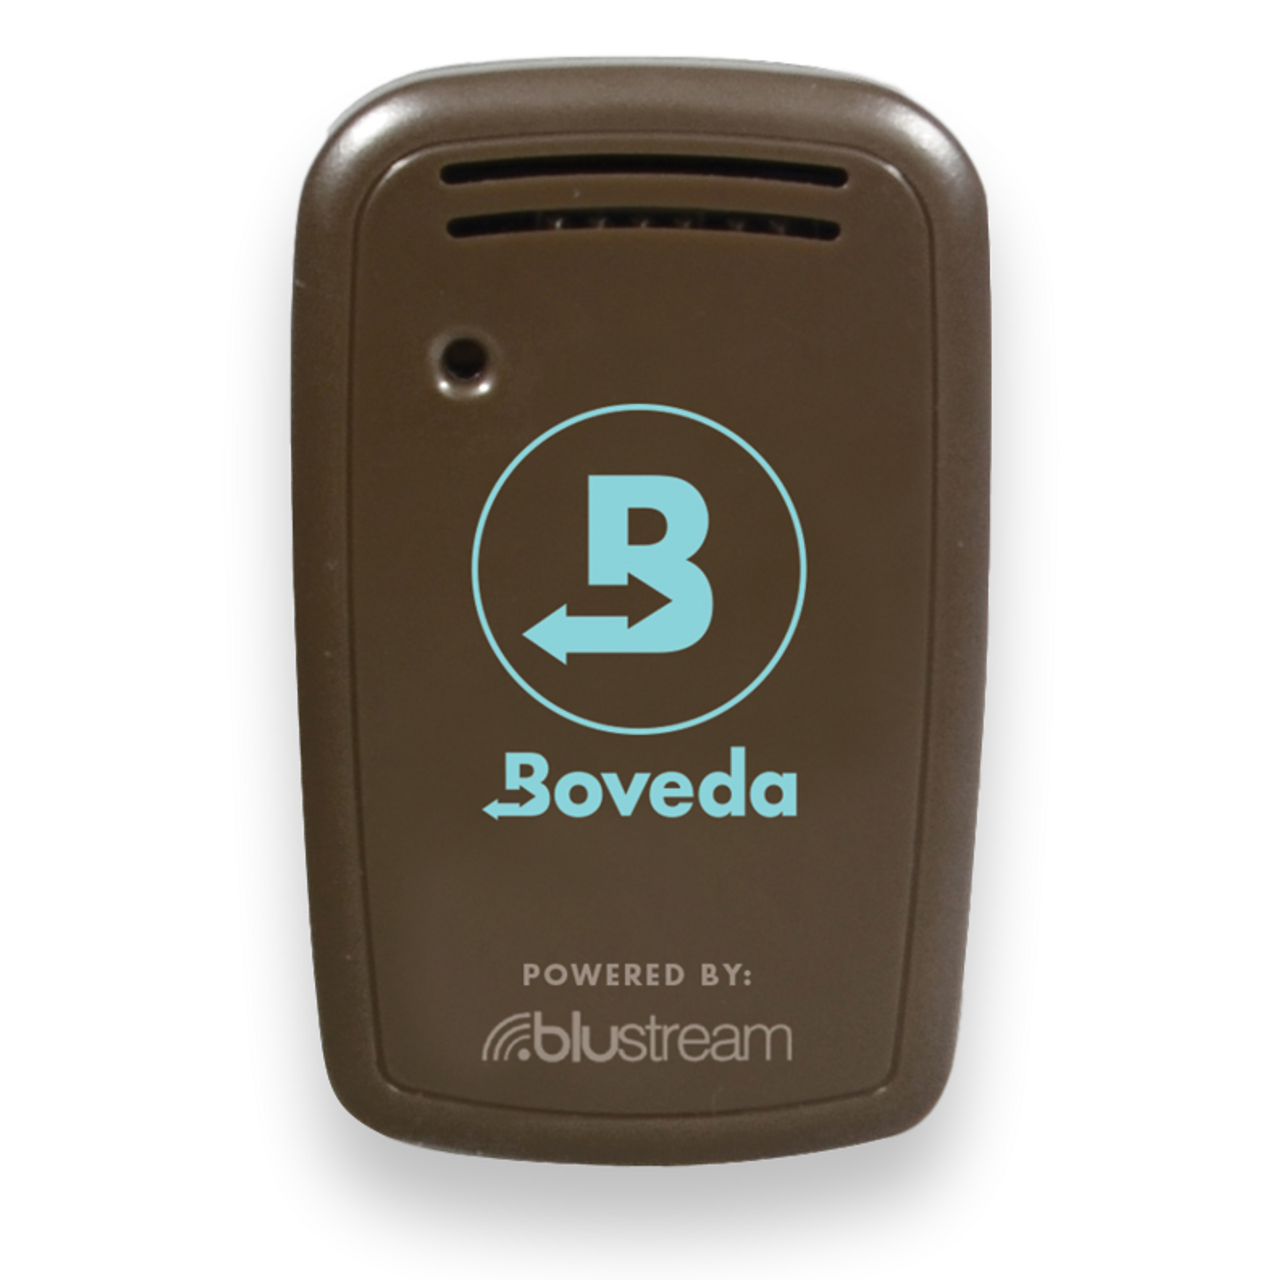 https://cdn11.bigcommerce.com/s-c63ufk/images/stencil/1280x1280/products/717/4300/Boveda_Butler_Sensor-1_clipped_rev_1__07098.1570402930.png?c=2?imbypass=on